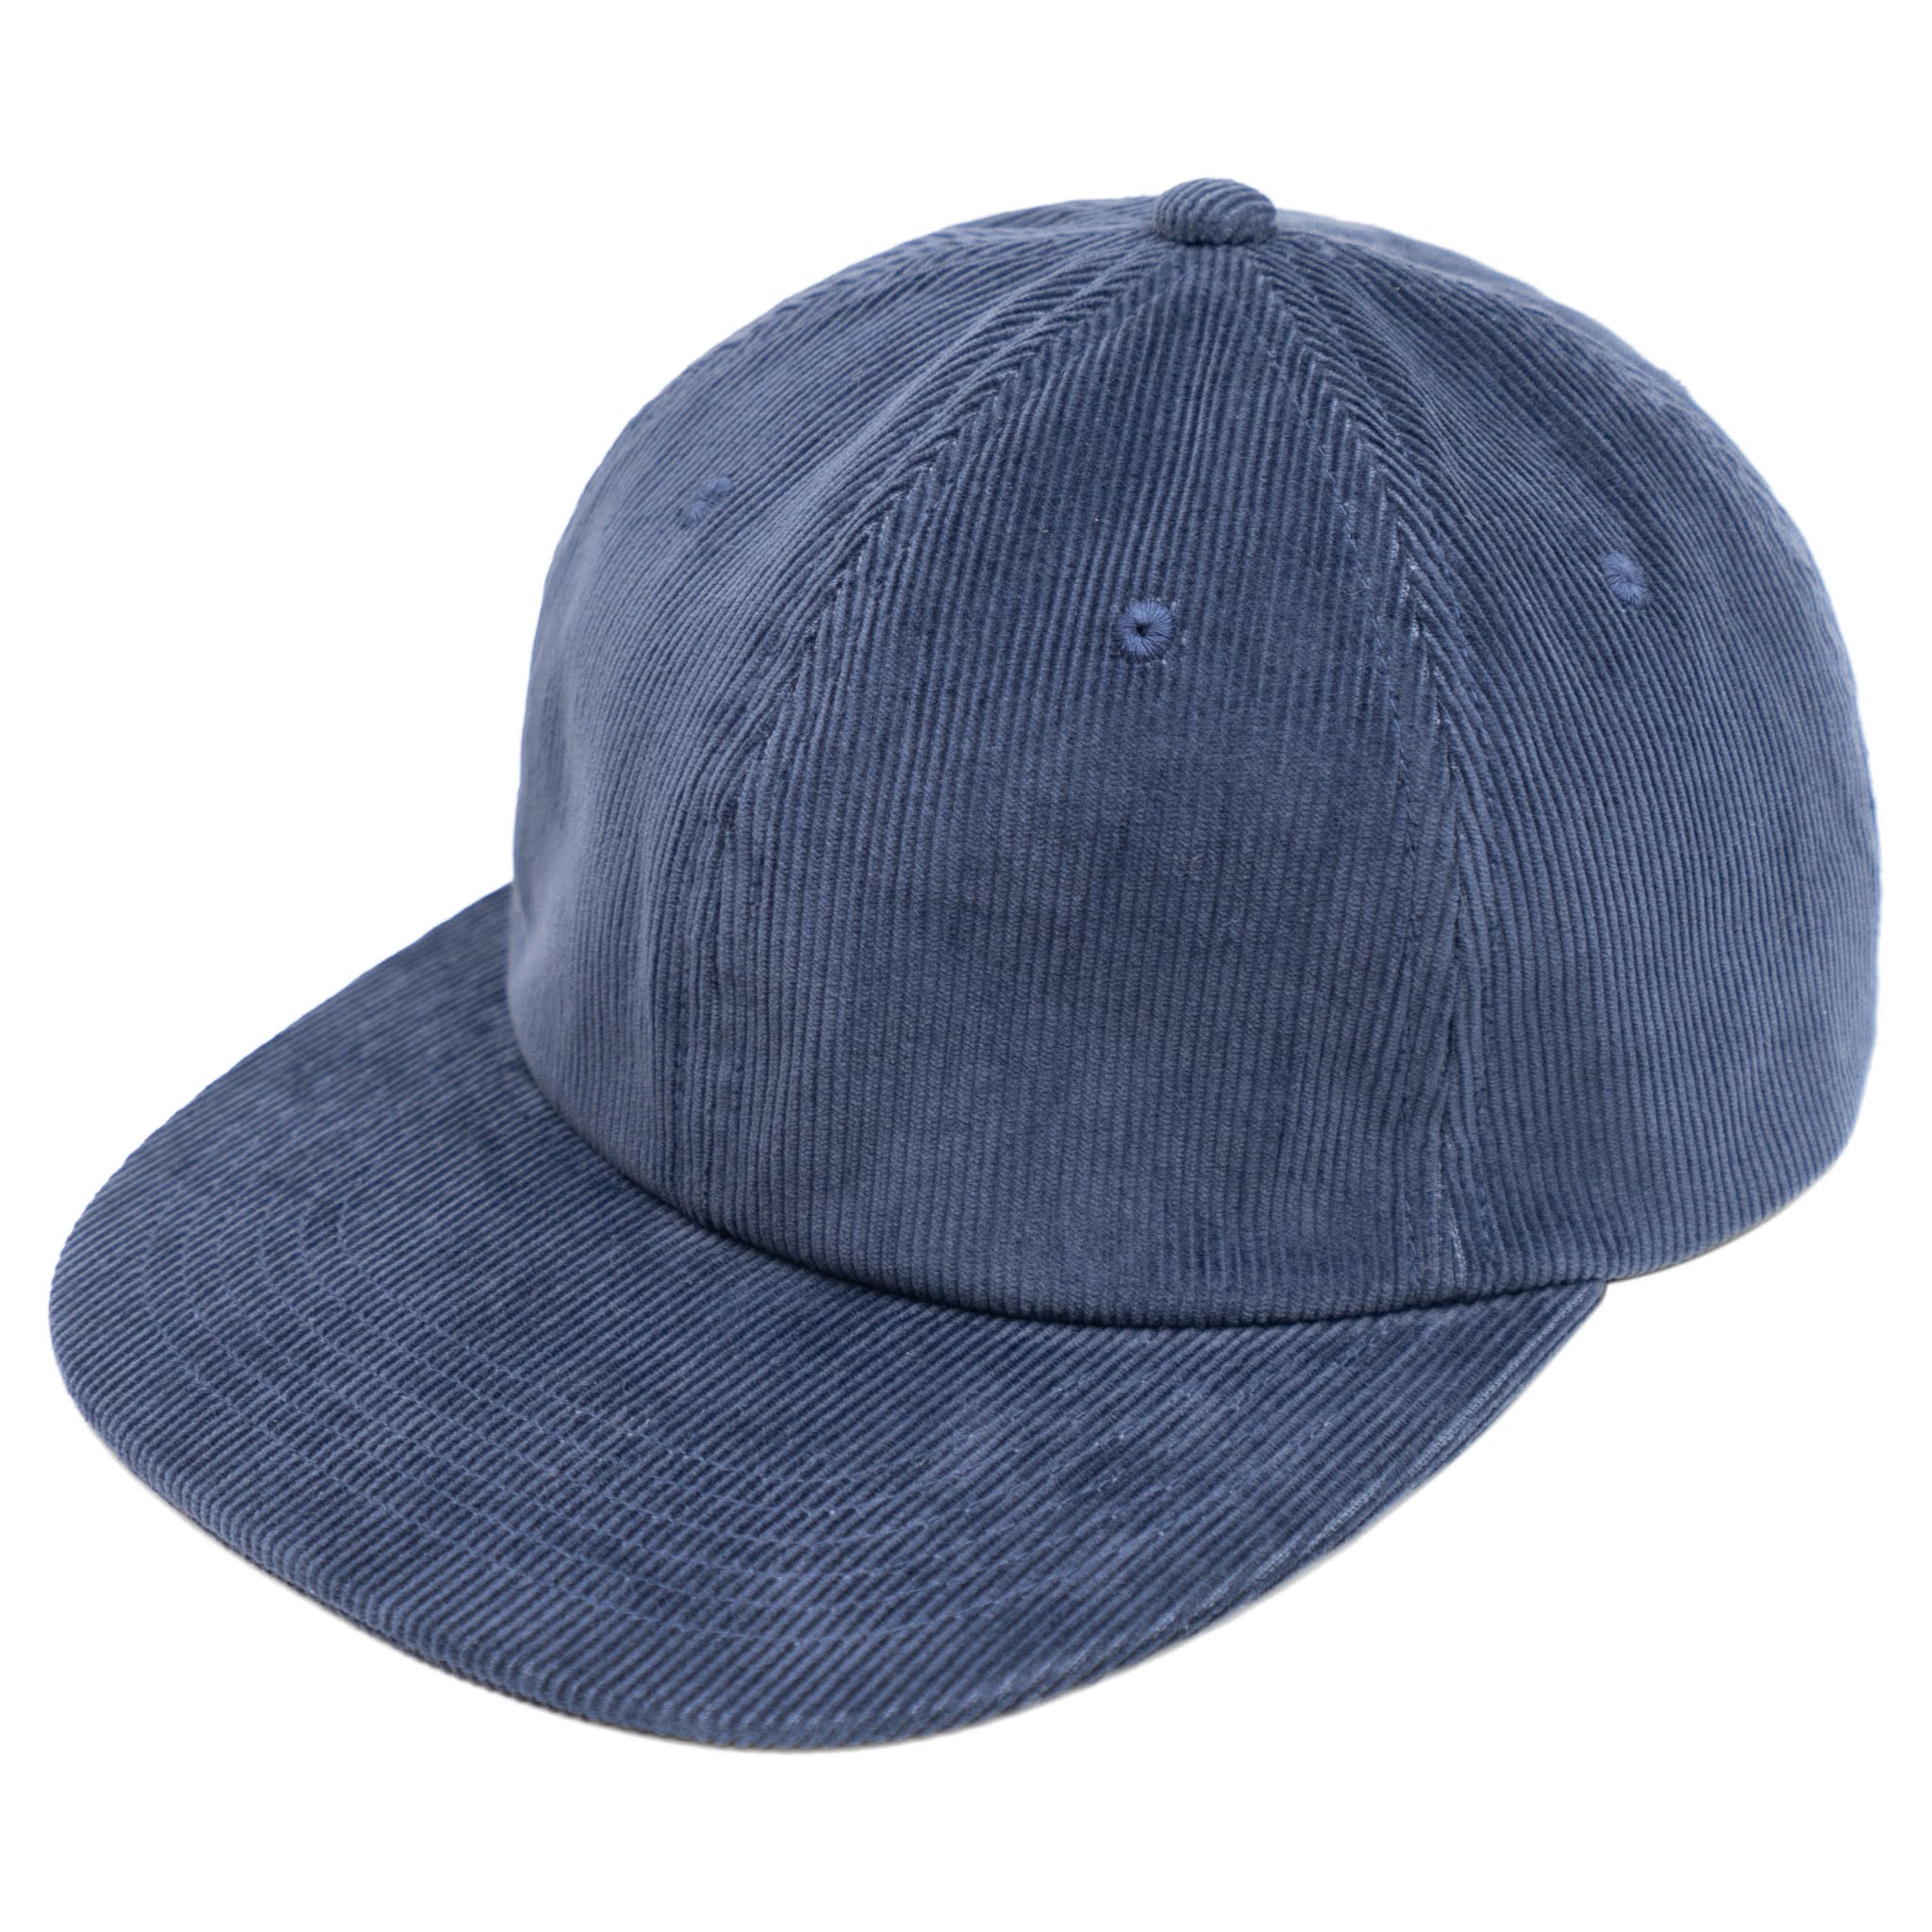 CUP AND CONE: Corduroy 6 Panel